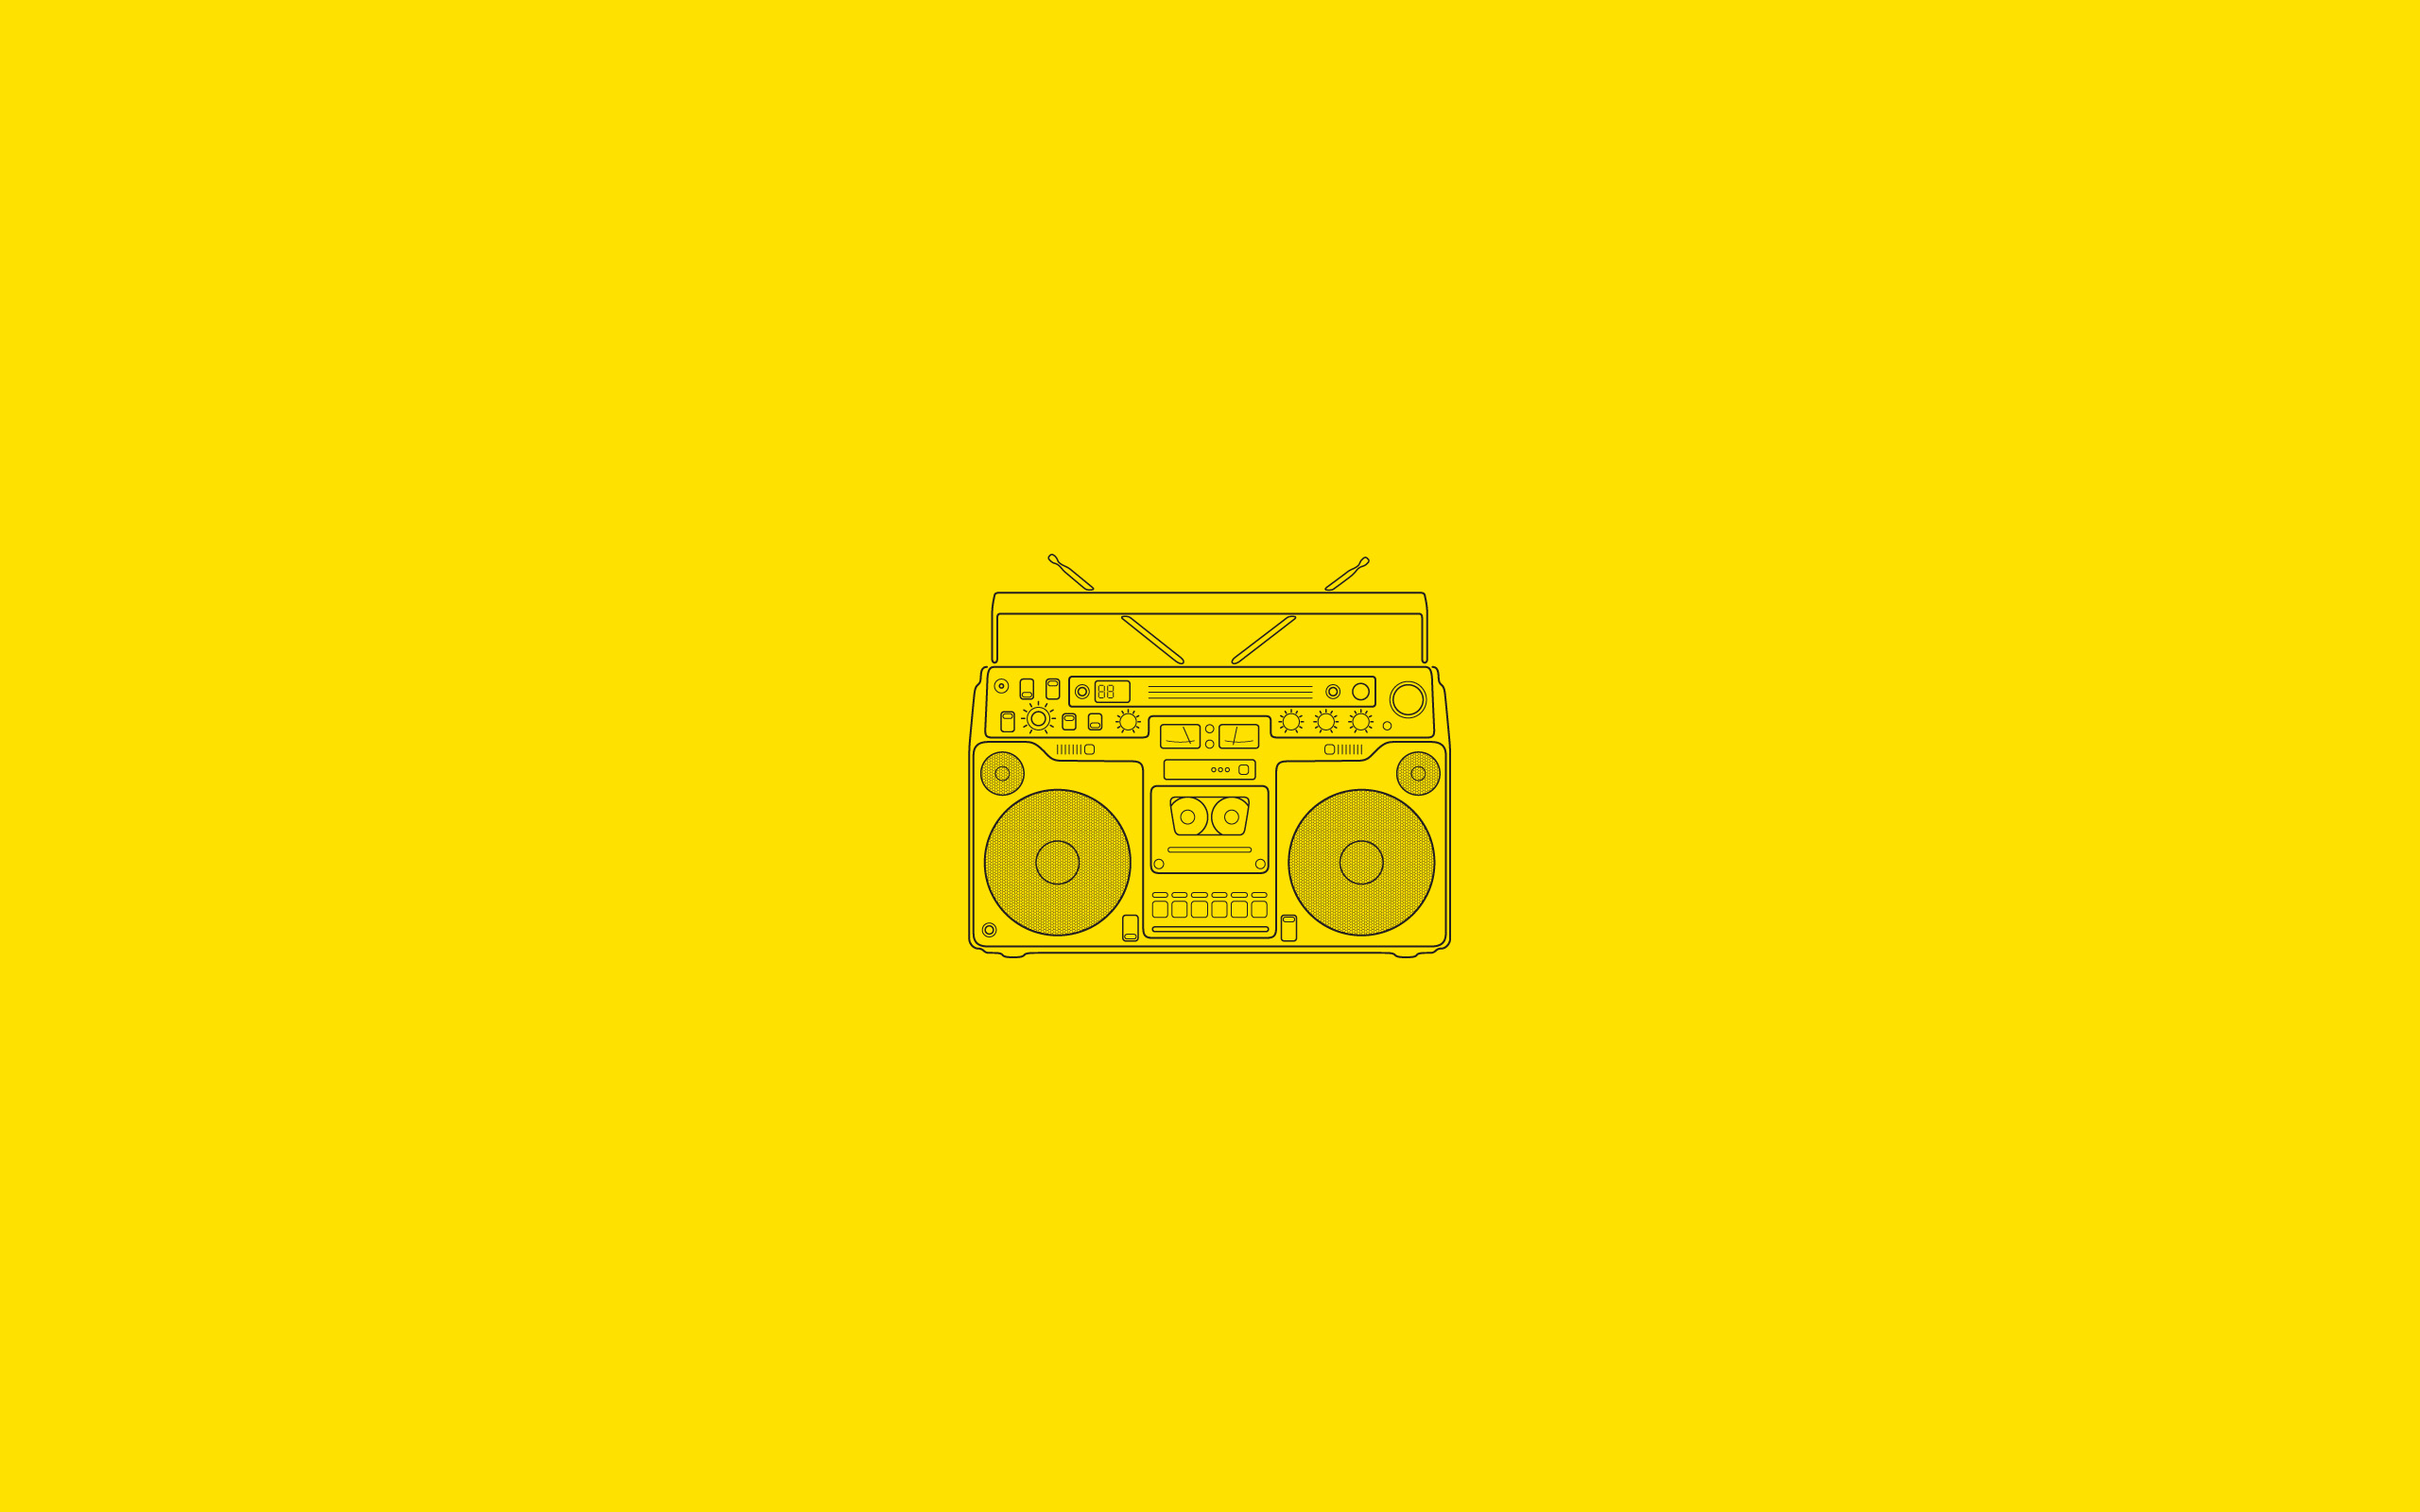 Boombox Wallpapers